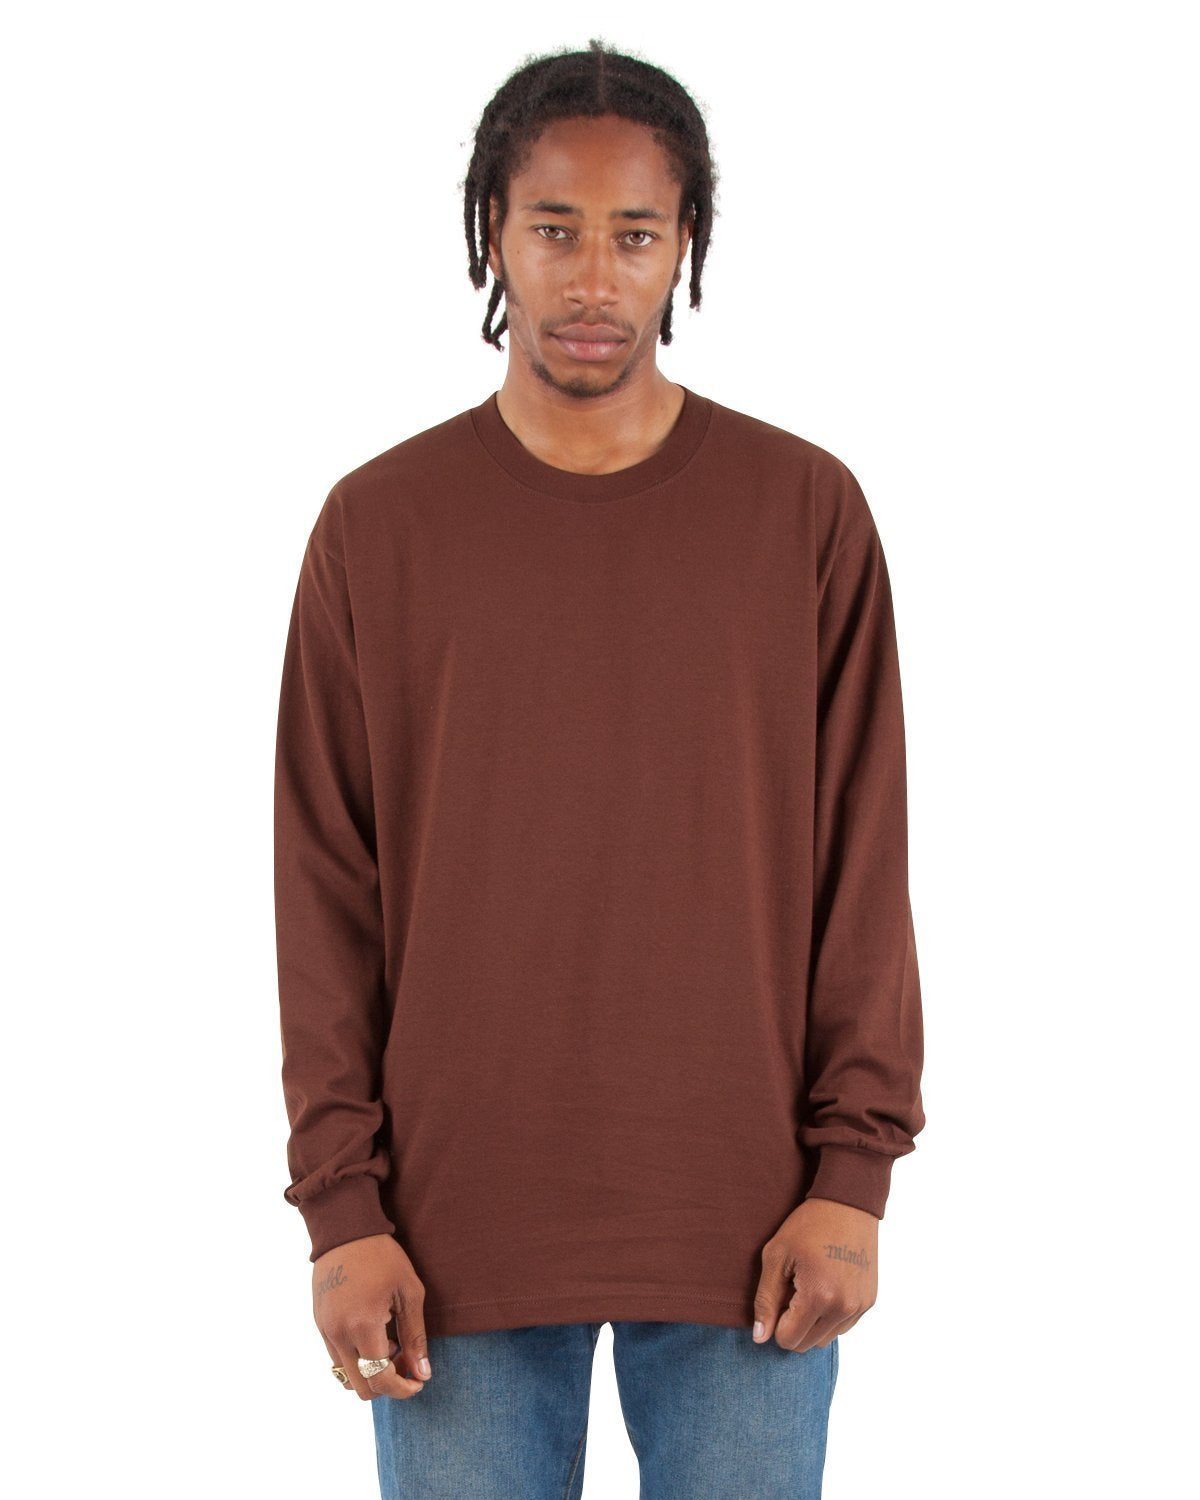 7.5 oz Max Heavyweight Long Sleeve - Large Sizes 5XL / Brown